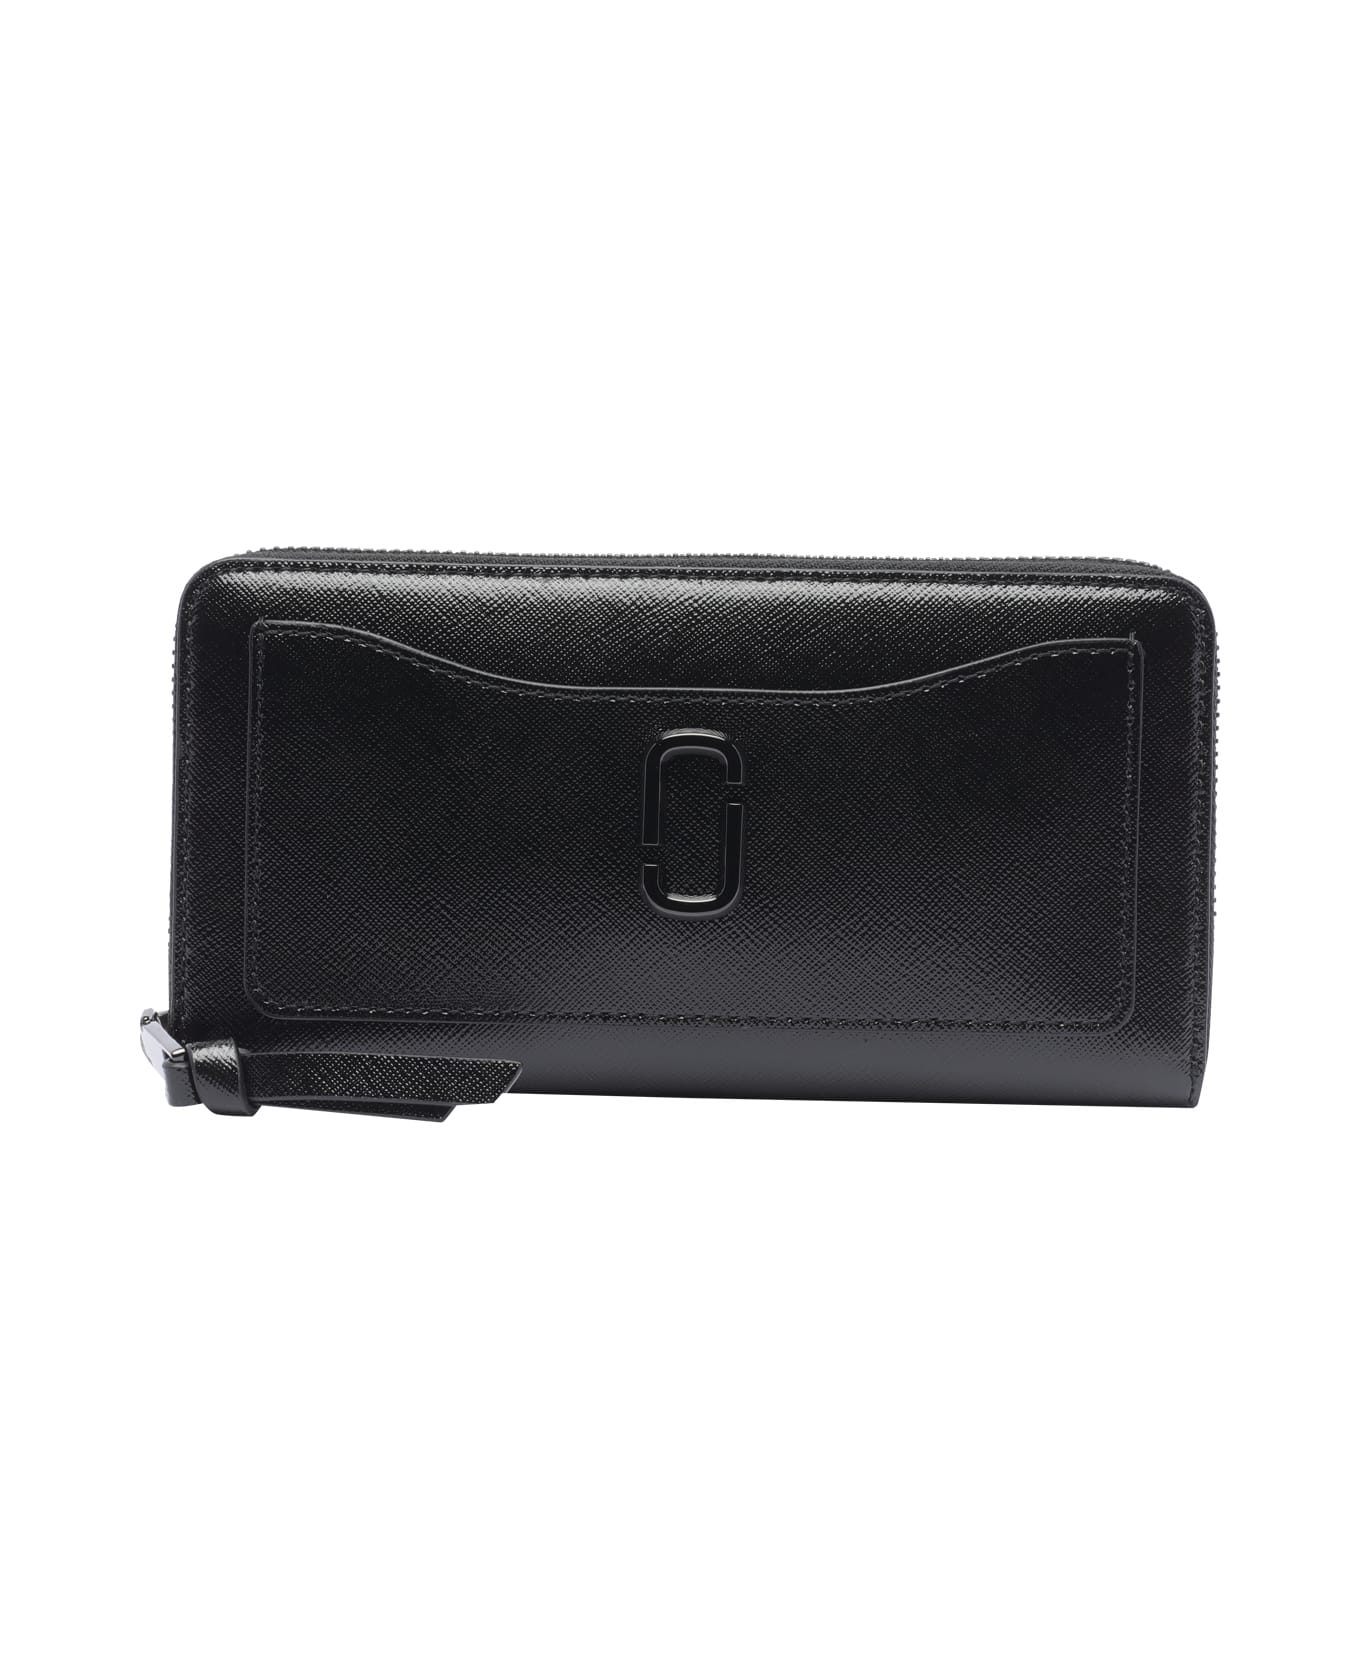 Marc Jacobs The Utility Snapshot Continental Wallet - Black